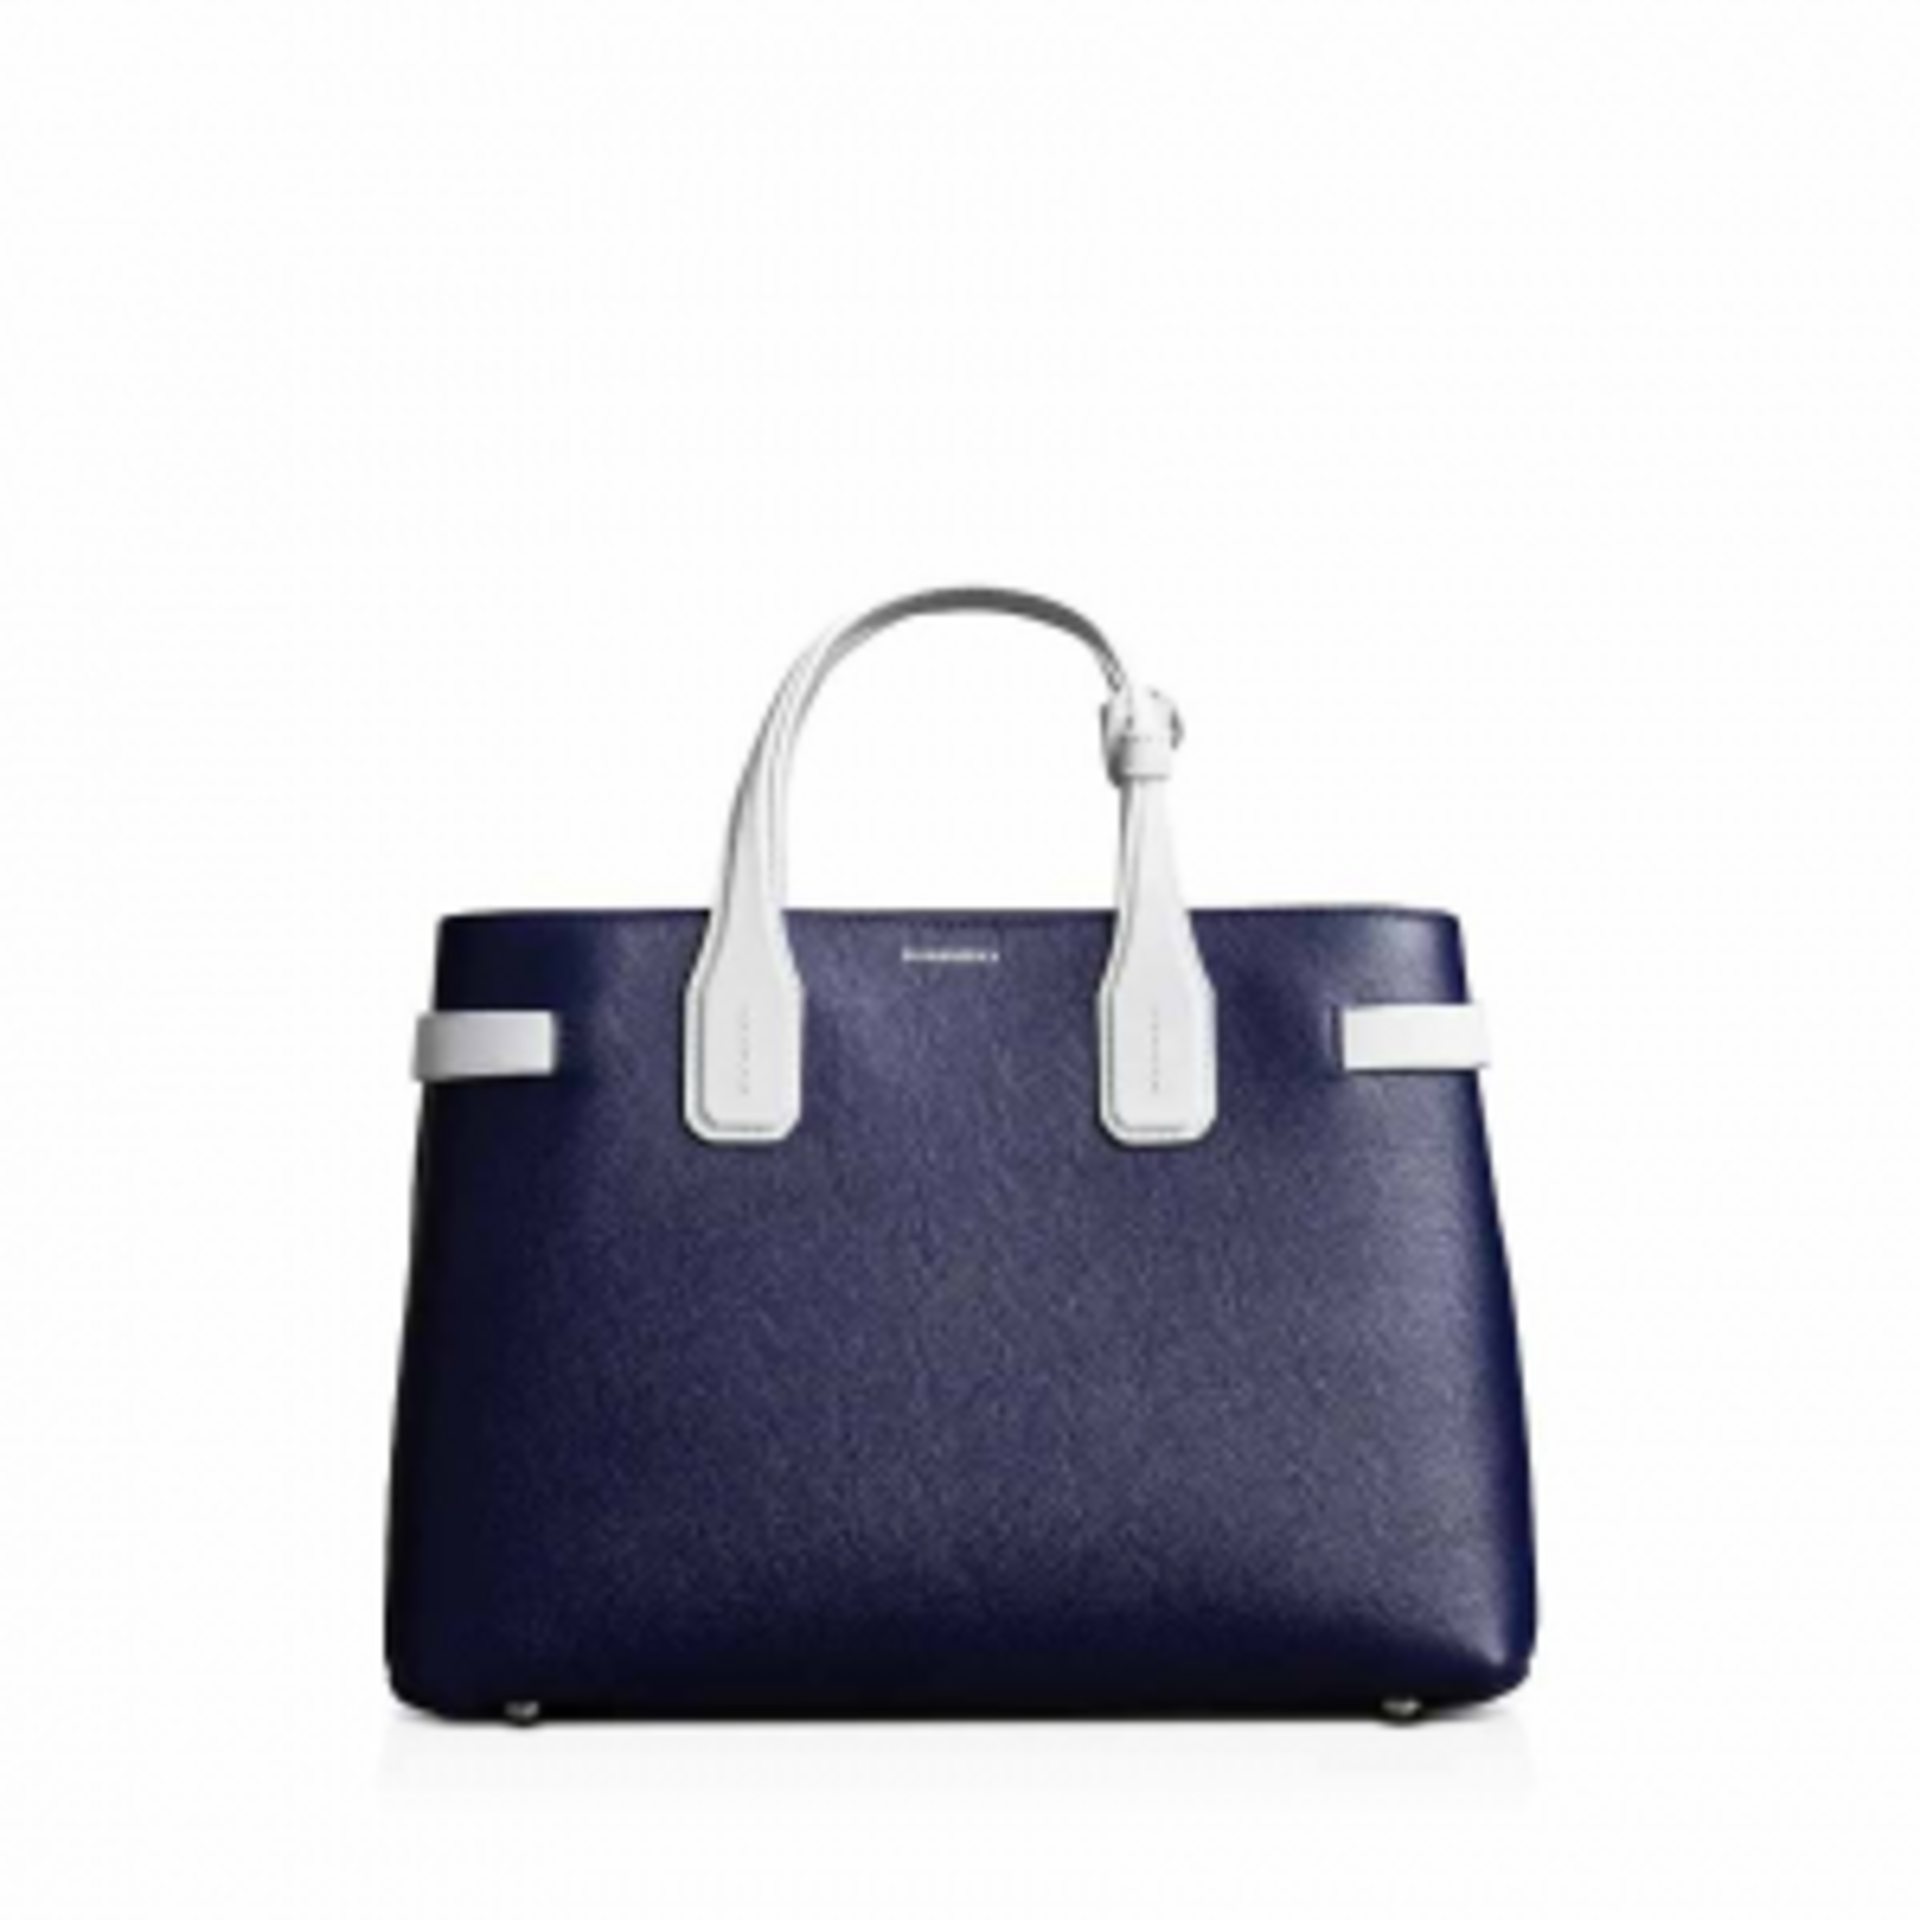 Genuine Burberry Navy Tote with White detail. Strap included. RRP £1,484.00. 100B/30